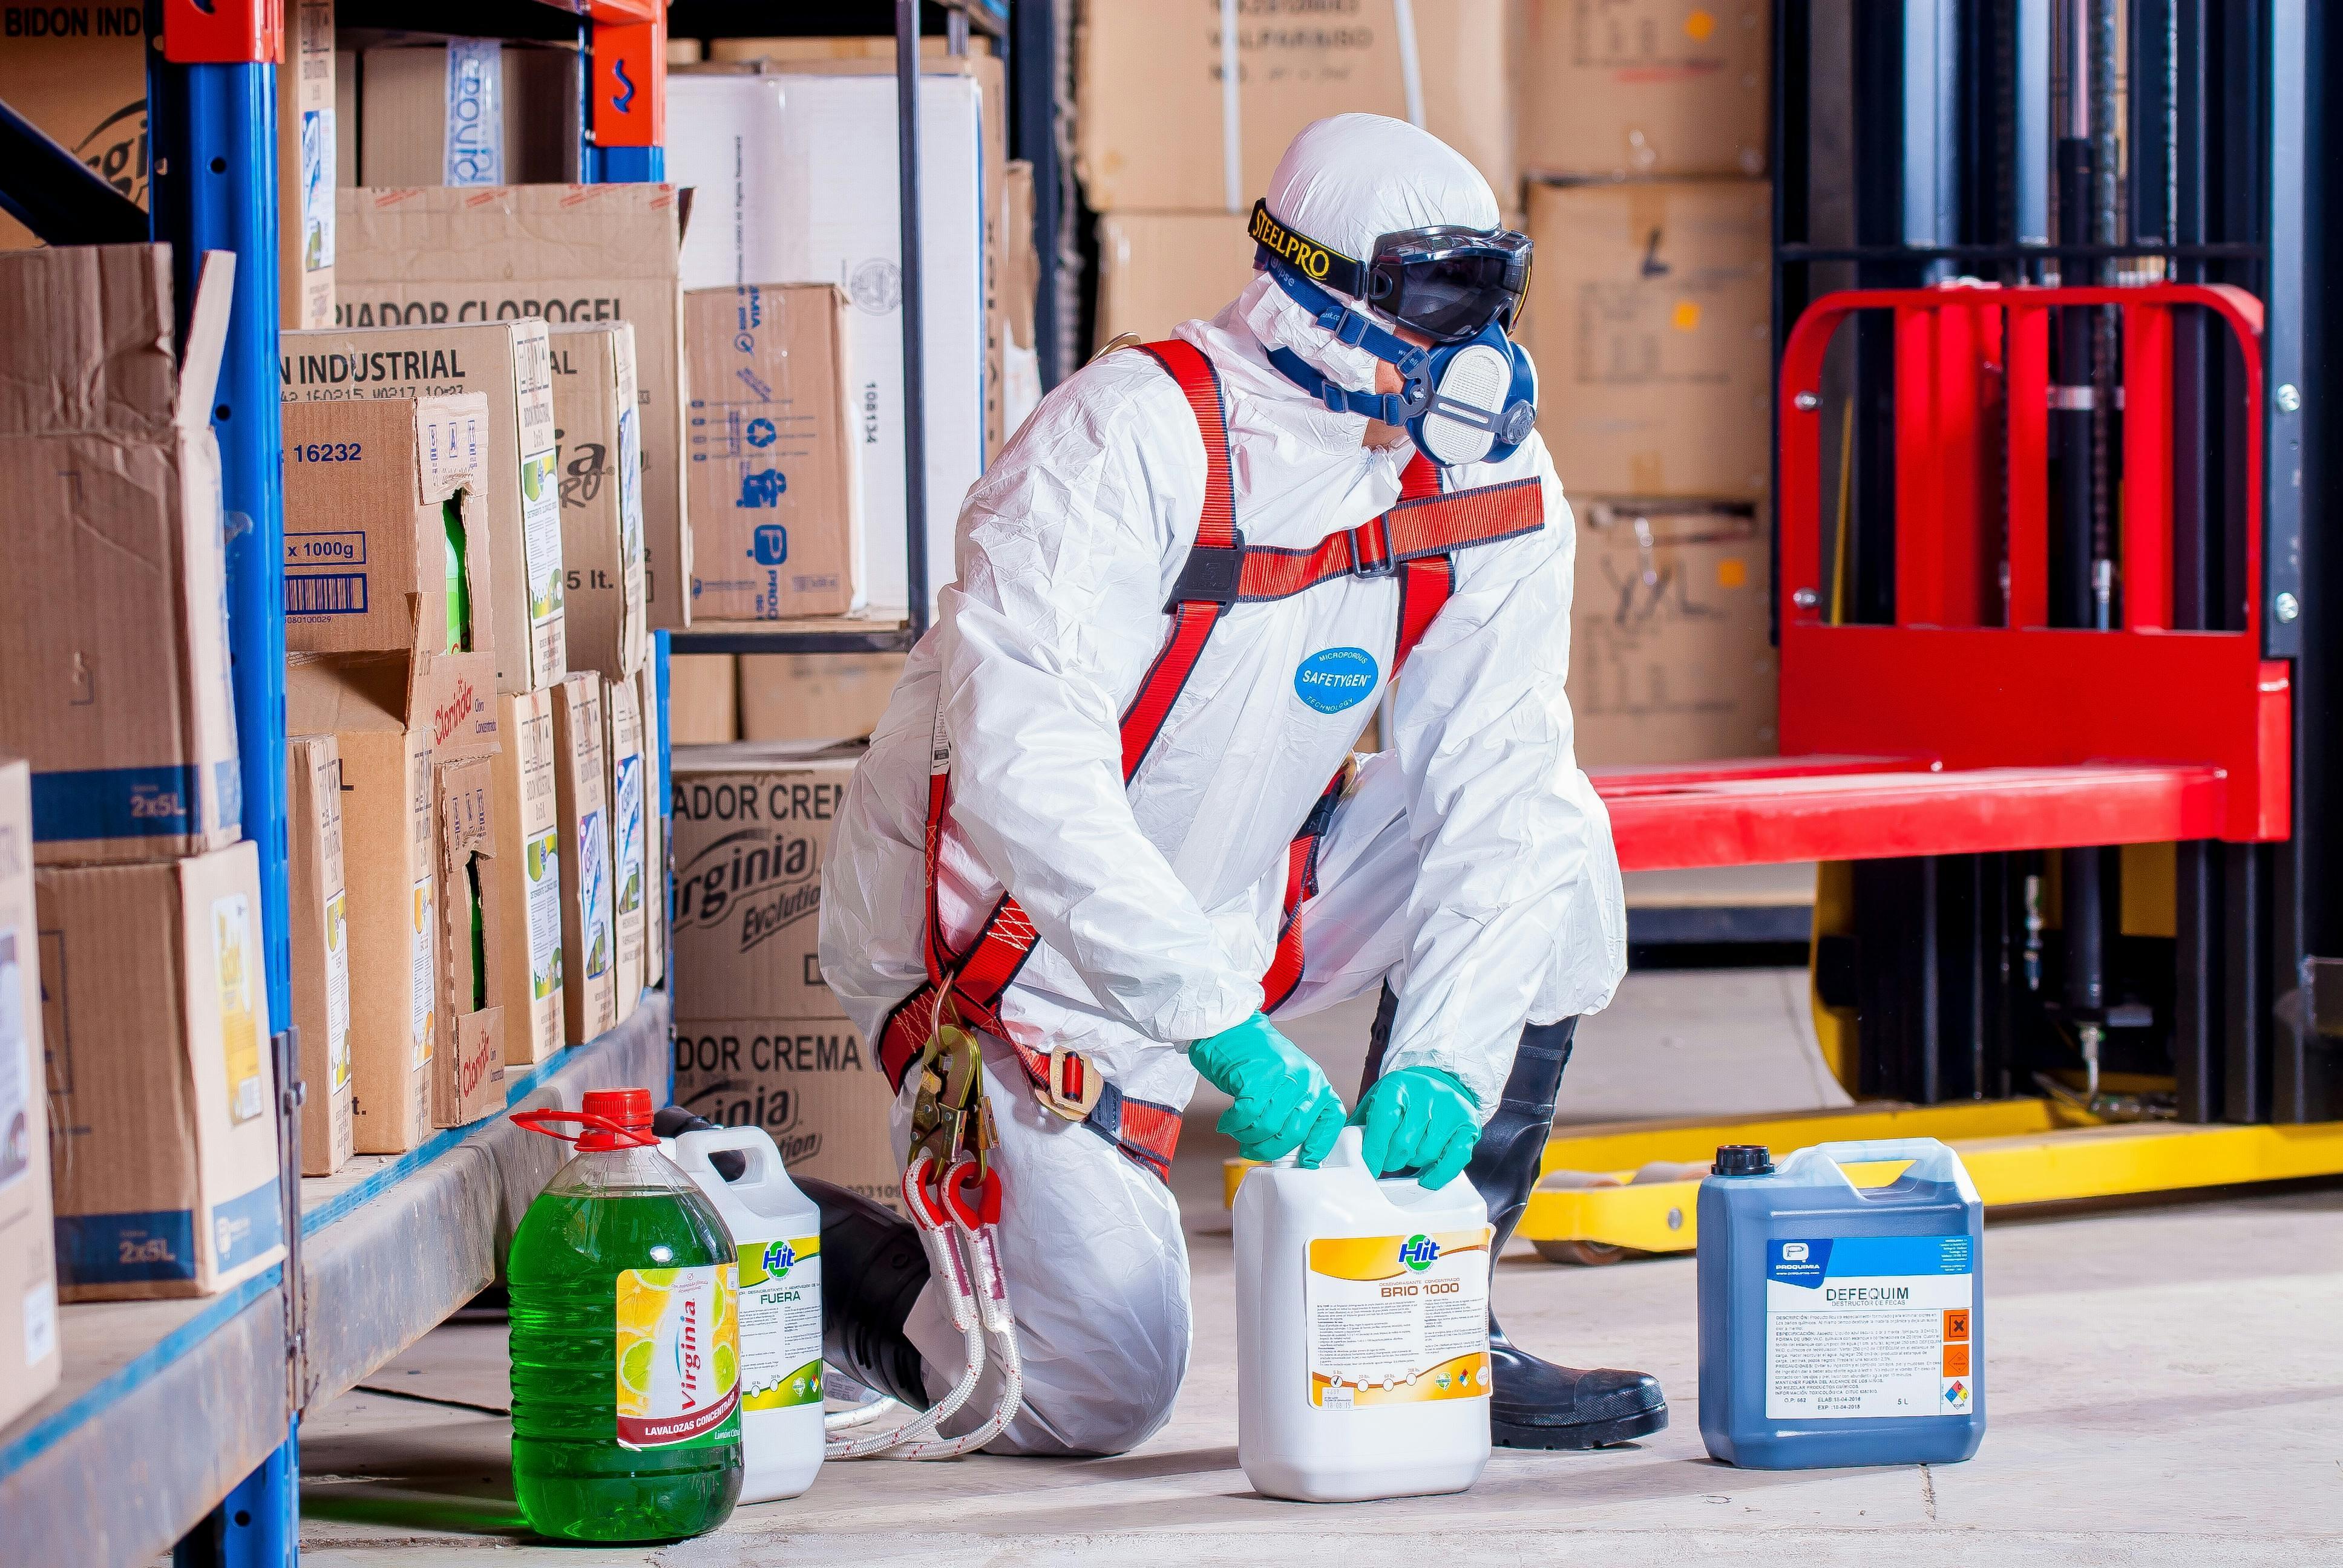  worker in full protective suit wearing goggles and protective mask while handling jars of chemicals